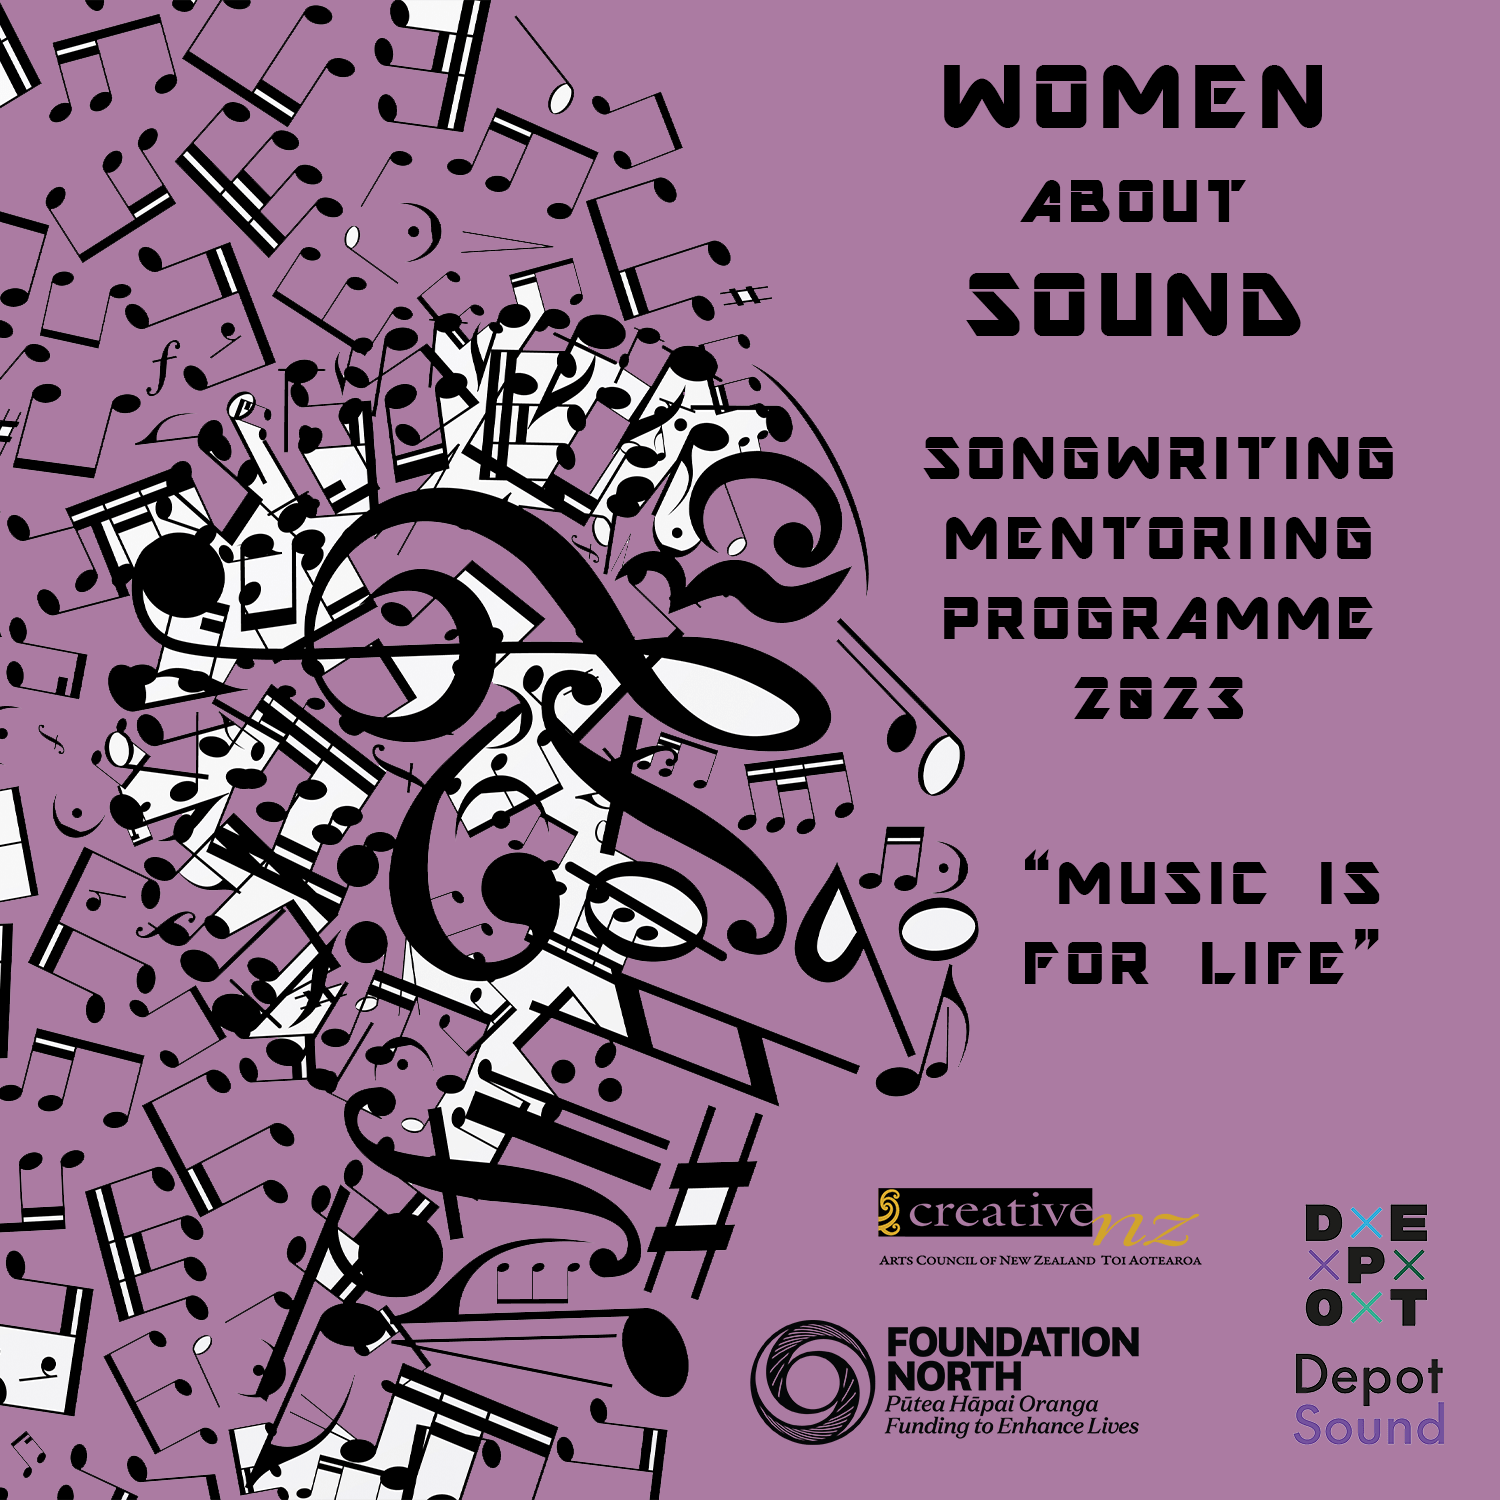 Women About Sound: Songwriting Mentoring Programme